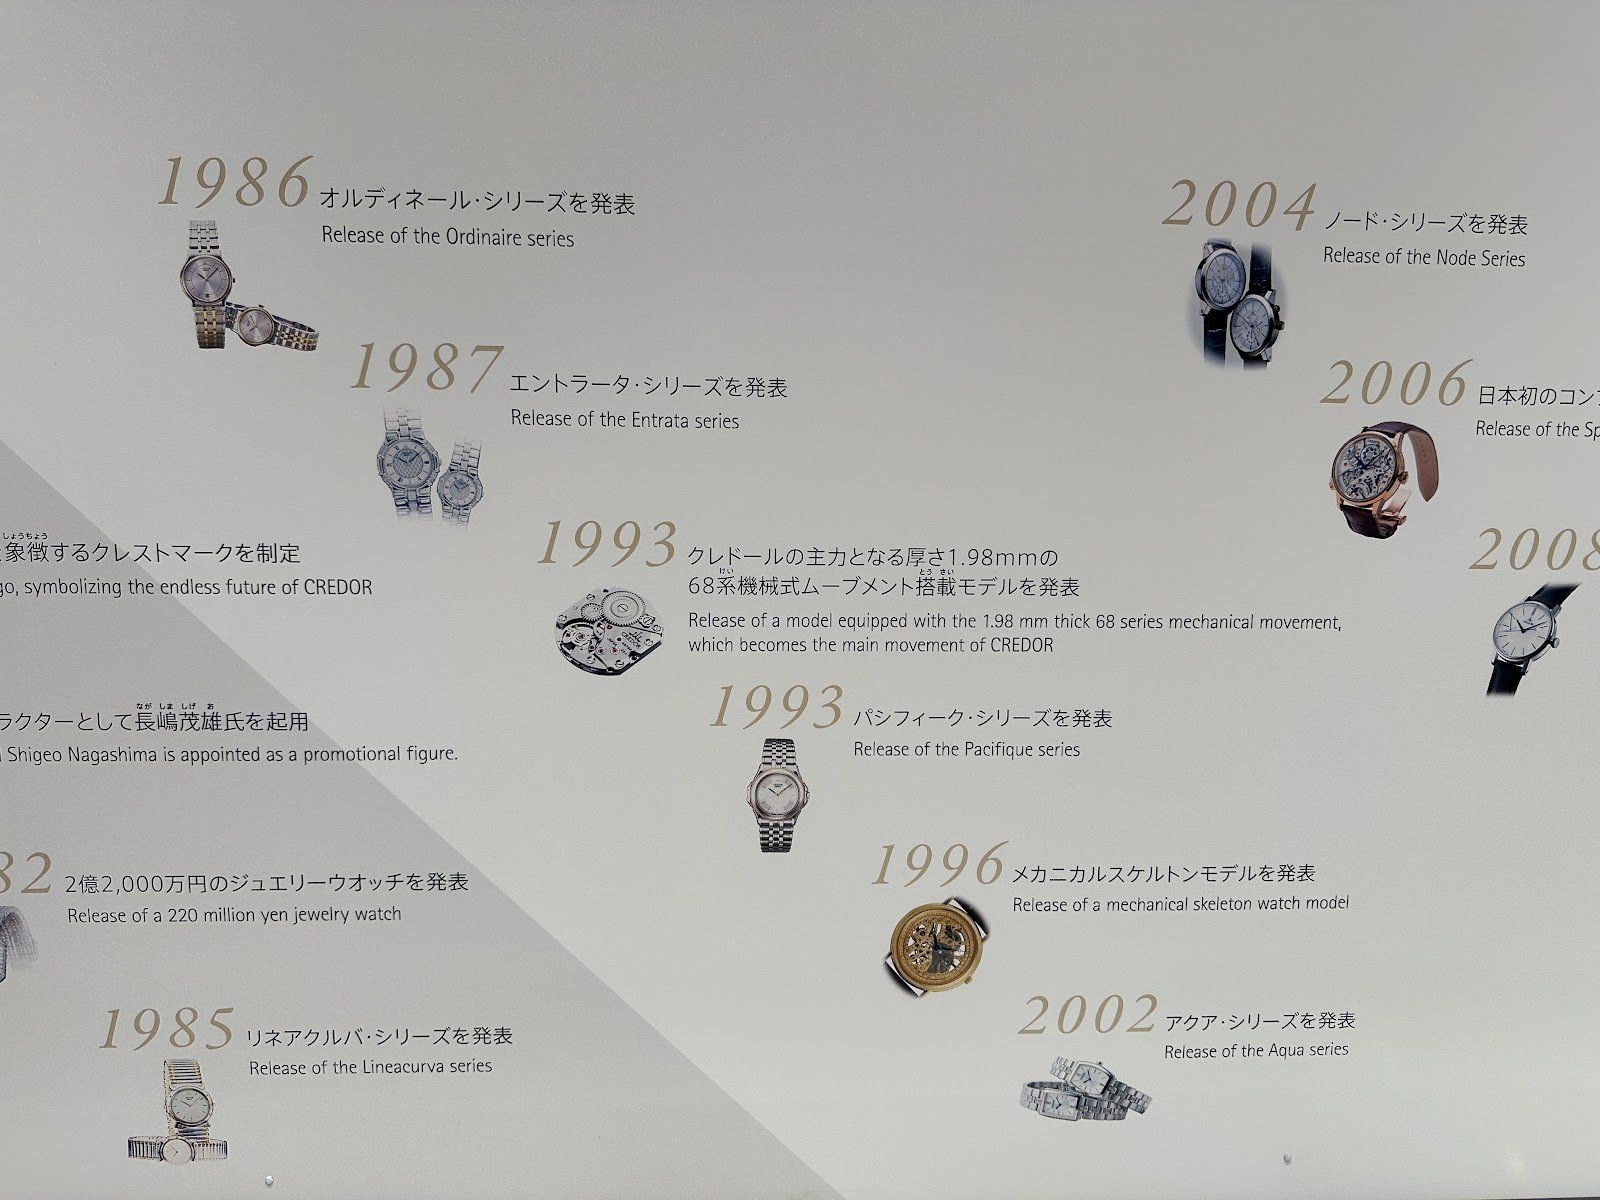 The Grand Seiko Ginza Museum: An Immersive Journey Through Japanese Watchmaking History